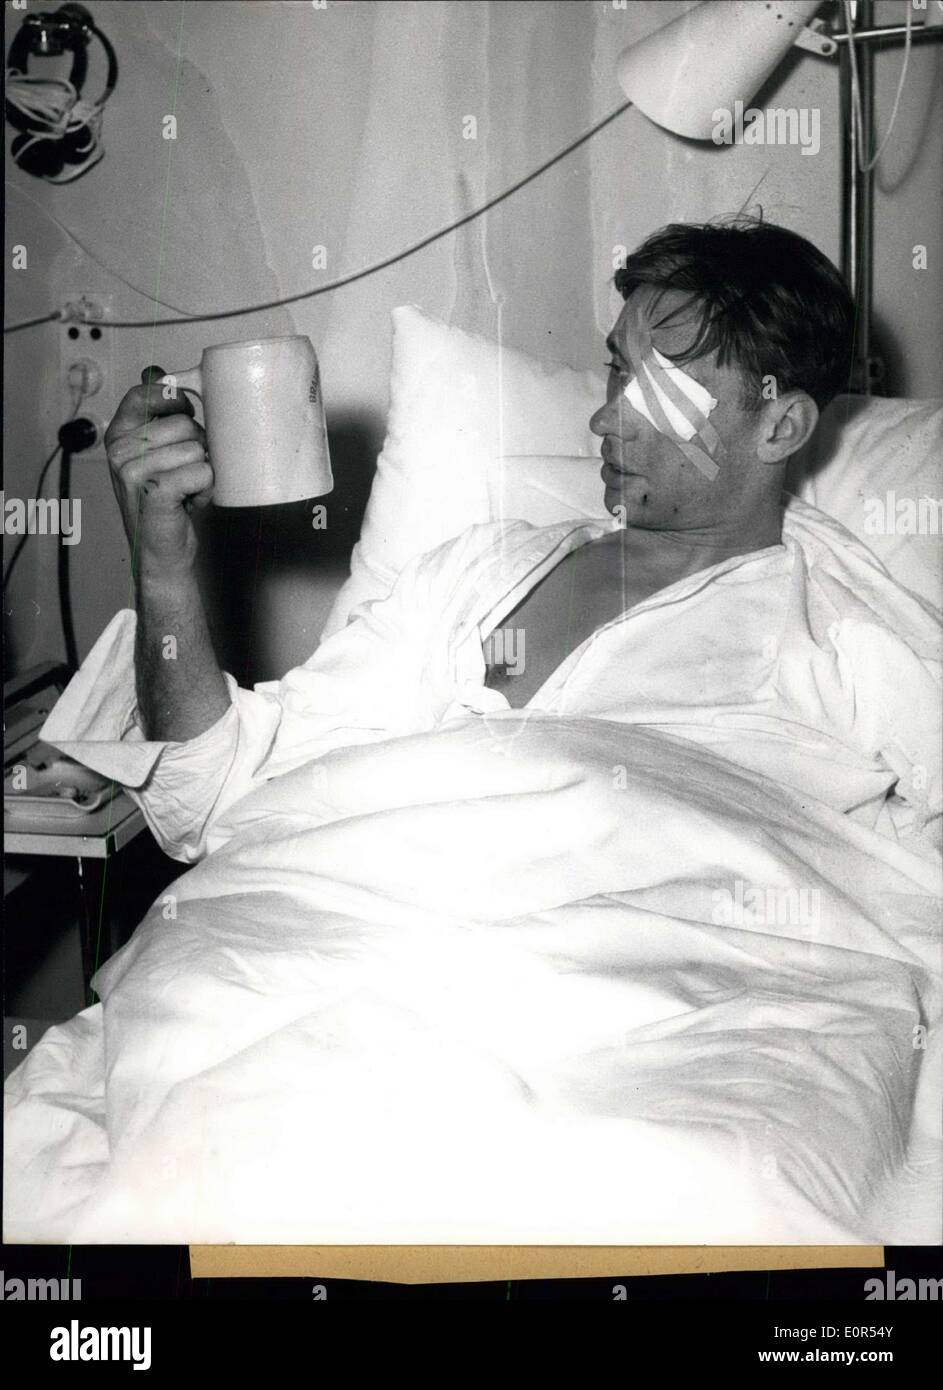 Feb. 11, 1958 - In the hospital at the right side of the Isar in Munich several injured members of the foot-ball team Manchester United, injured at the aircraft's catastrophy at February 7,58 in Munchen-Riem, already are on the way of recovery. Picture 1, Kwn Morgan sitting in a wheel chair on the way to the X-rays. Picture 2, Bobby Charlton already is drinking out of a genuine Bavarian beer-tankard. Picture 3, Wood Raymond (left side) and Bobby Charlton (right side) already are able to laugh Stock Photo